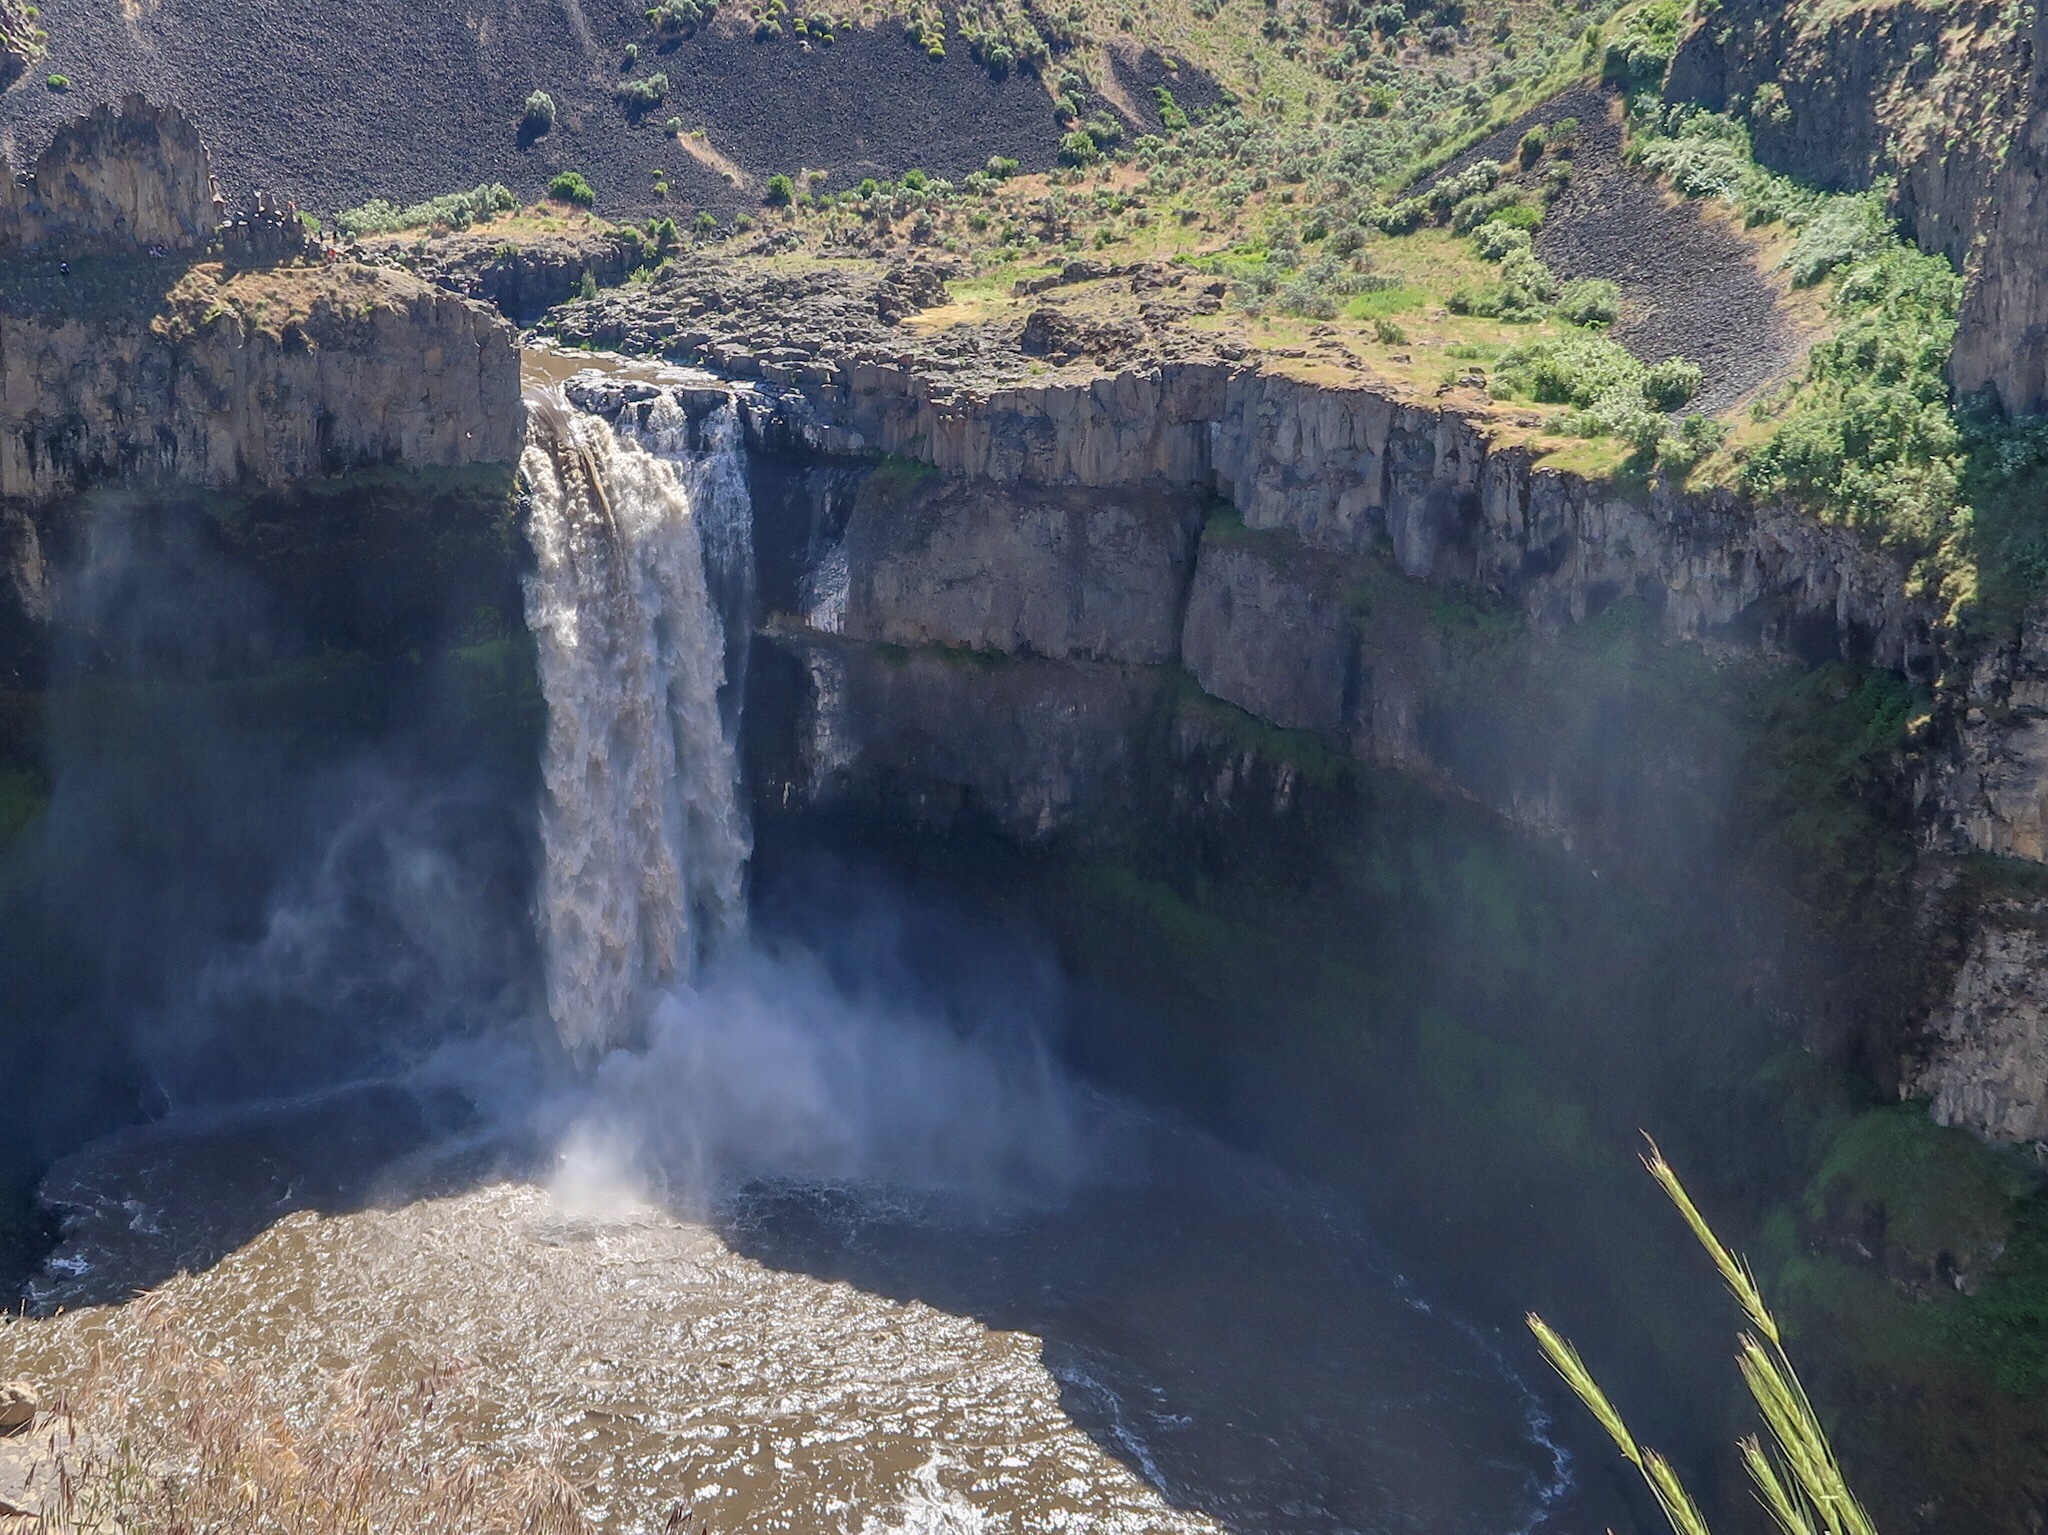 Washington’s Beautiful but Deadly Official Waterfall: The Palouse Falls